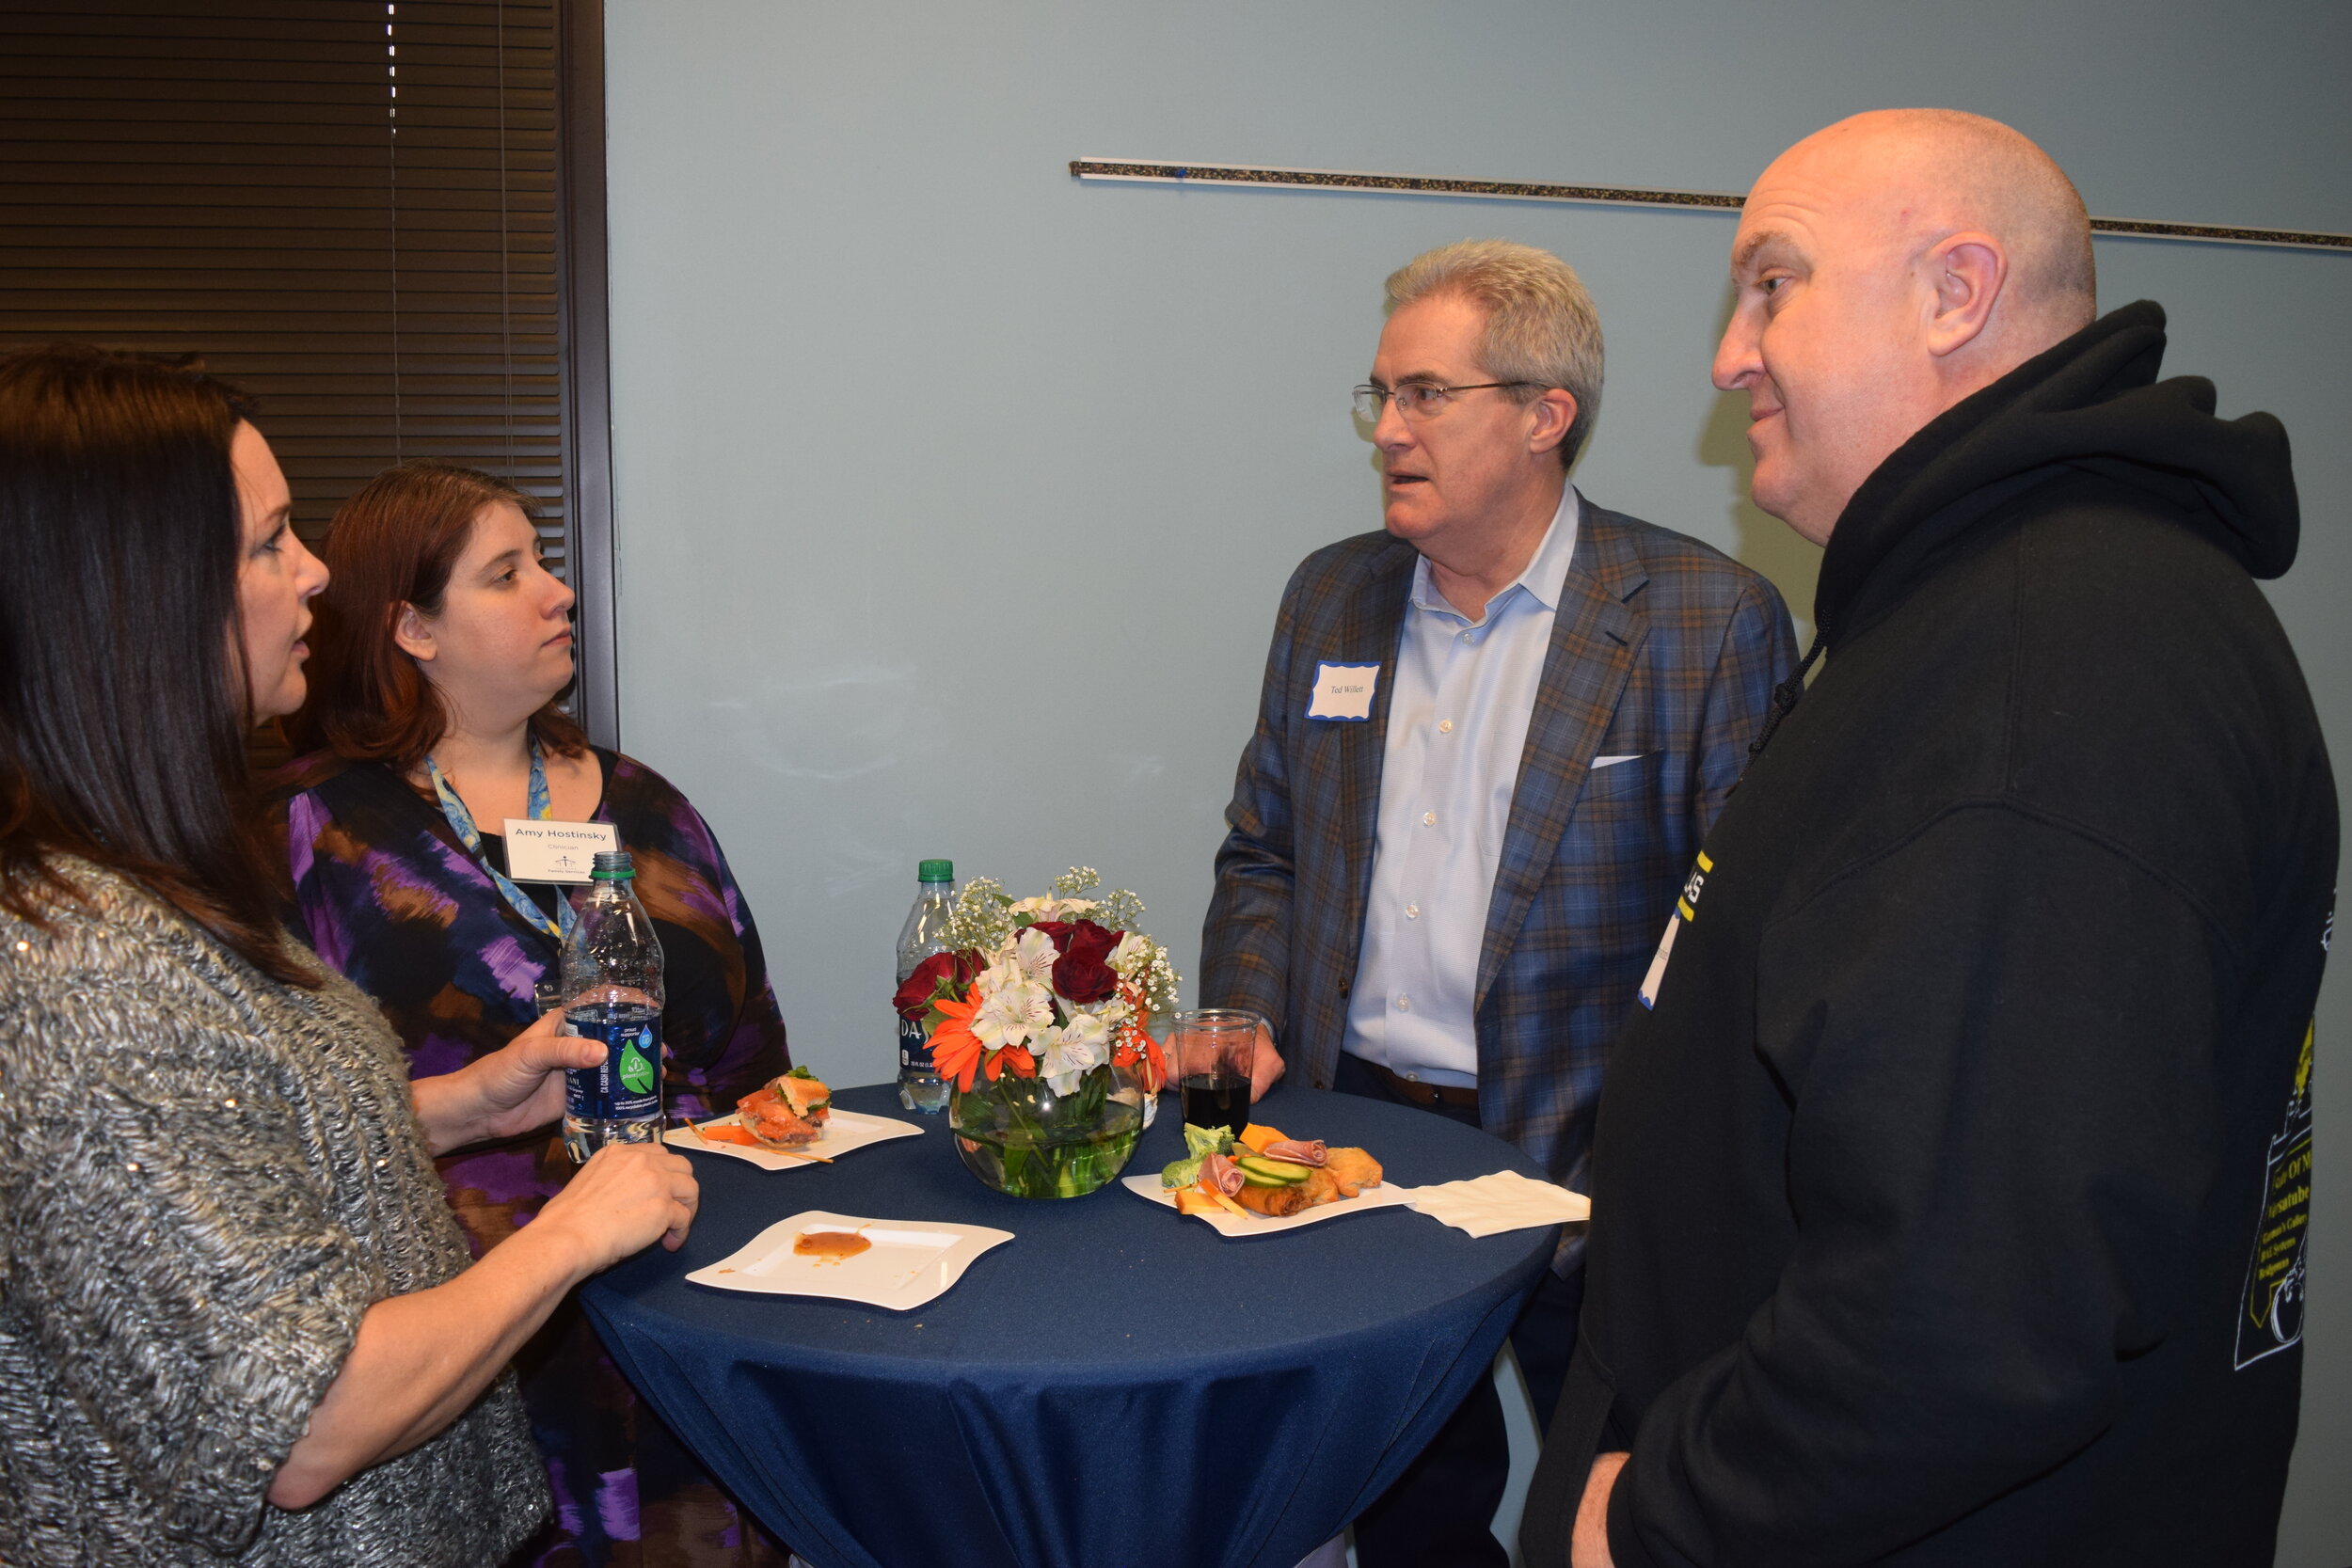 Board member Ted Willett (center) talks with guests.